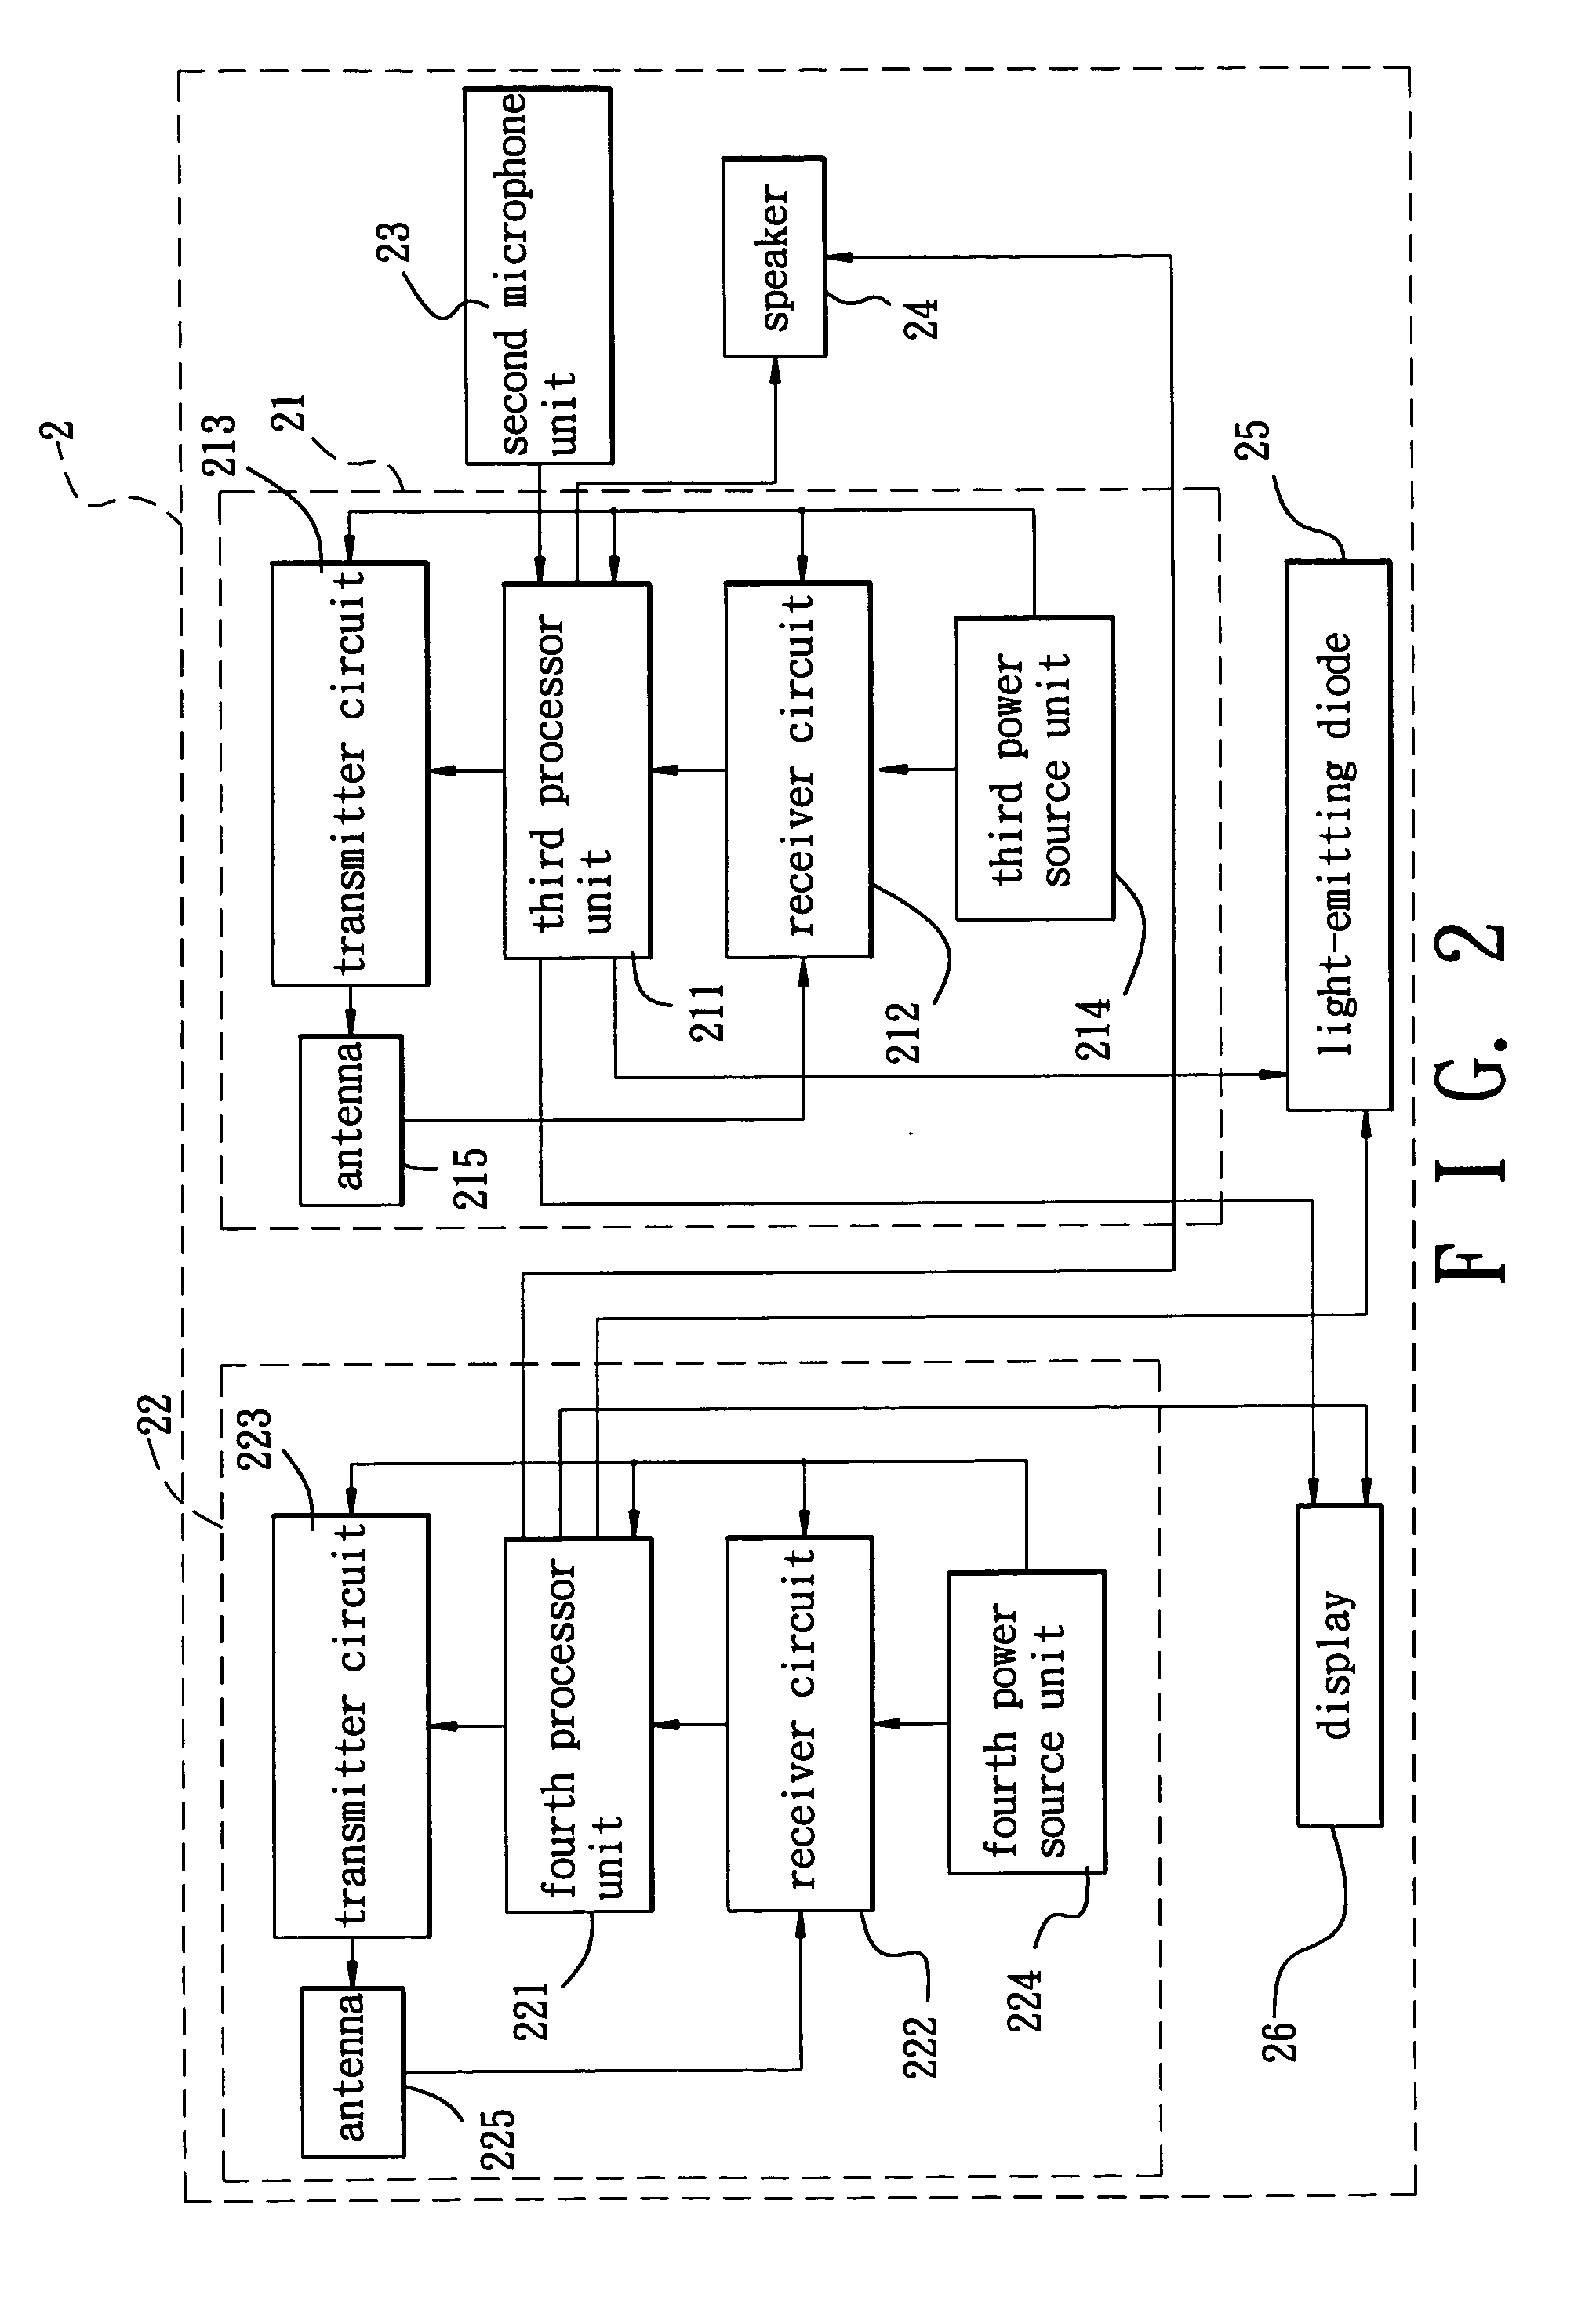 Tracking method and system to be implemented using a wireless telecommunications network